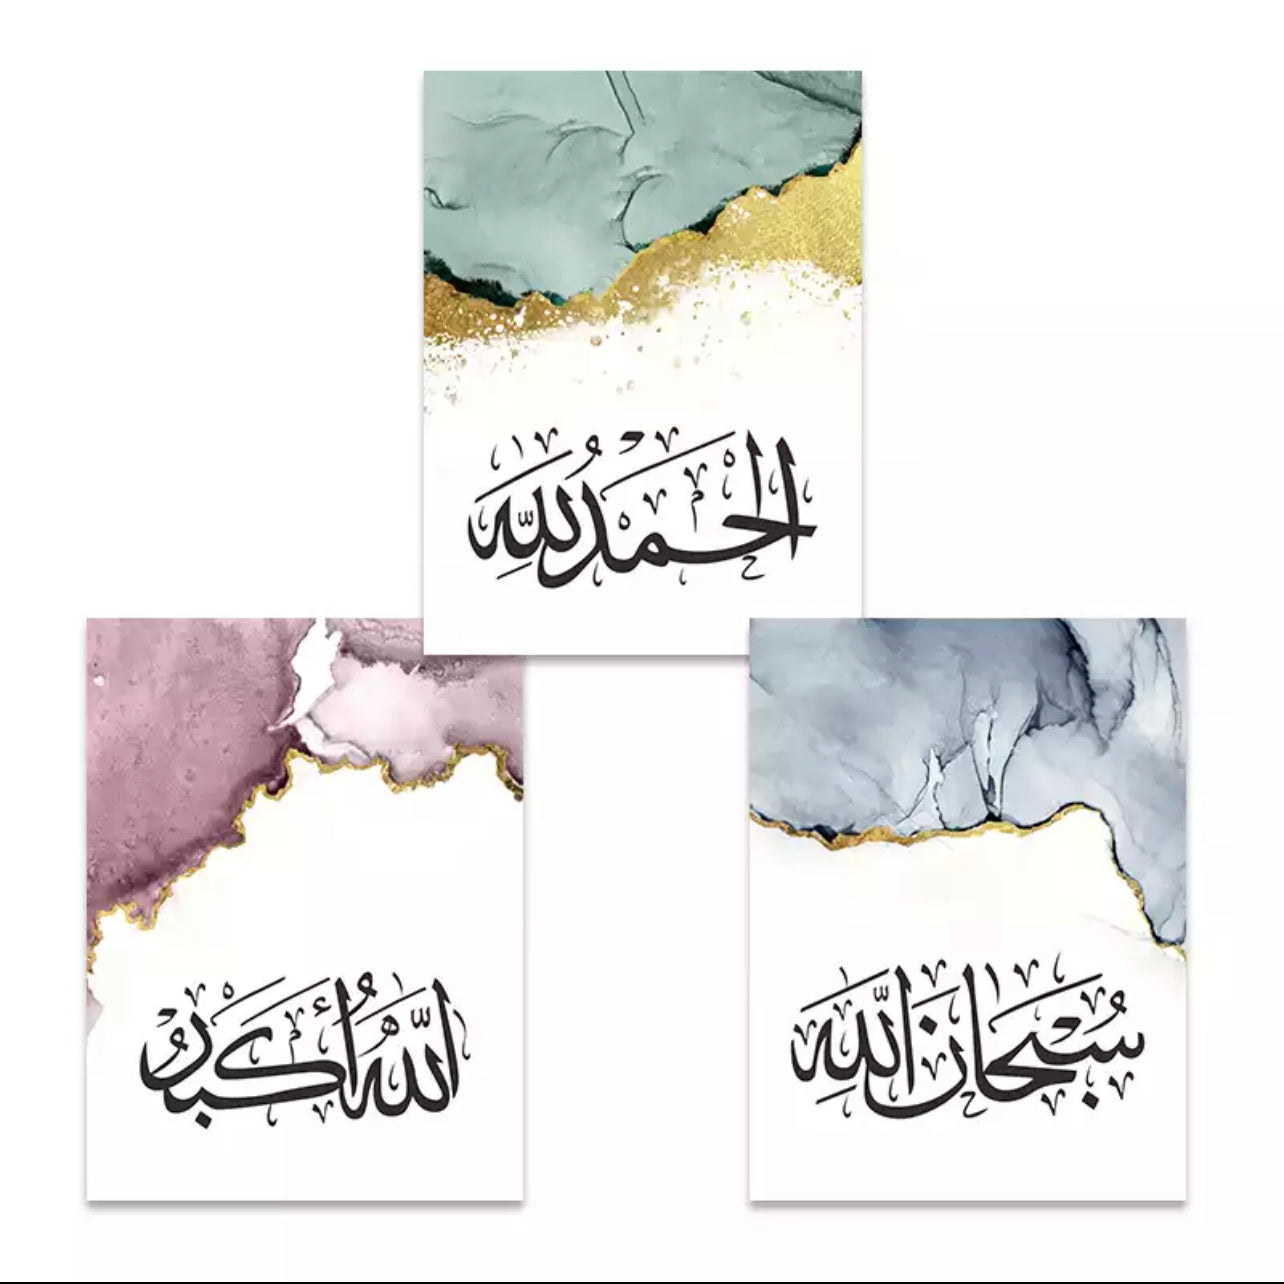 Watercolour Effect In Pink, Green And Blue With Black Islamic Calligraphy